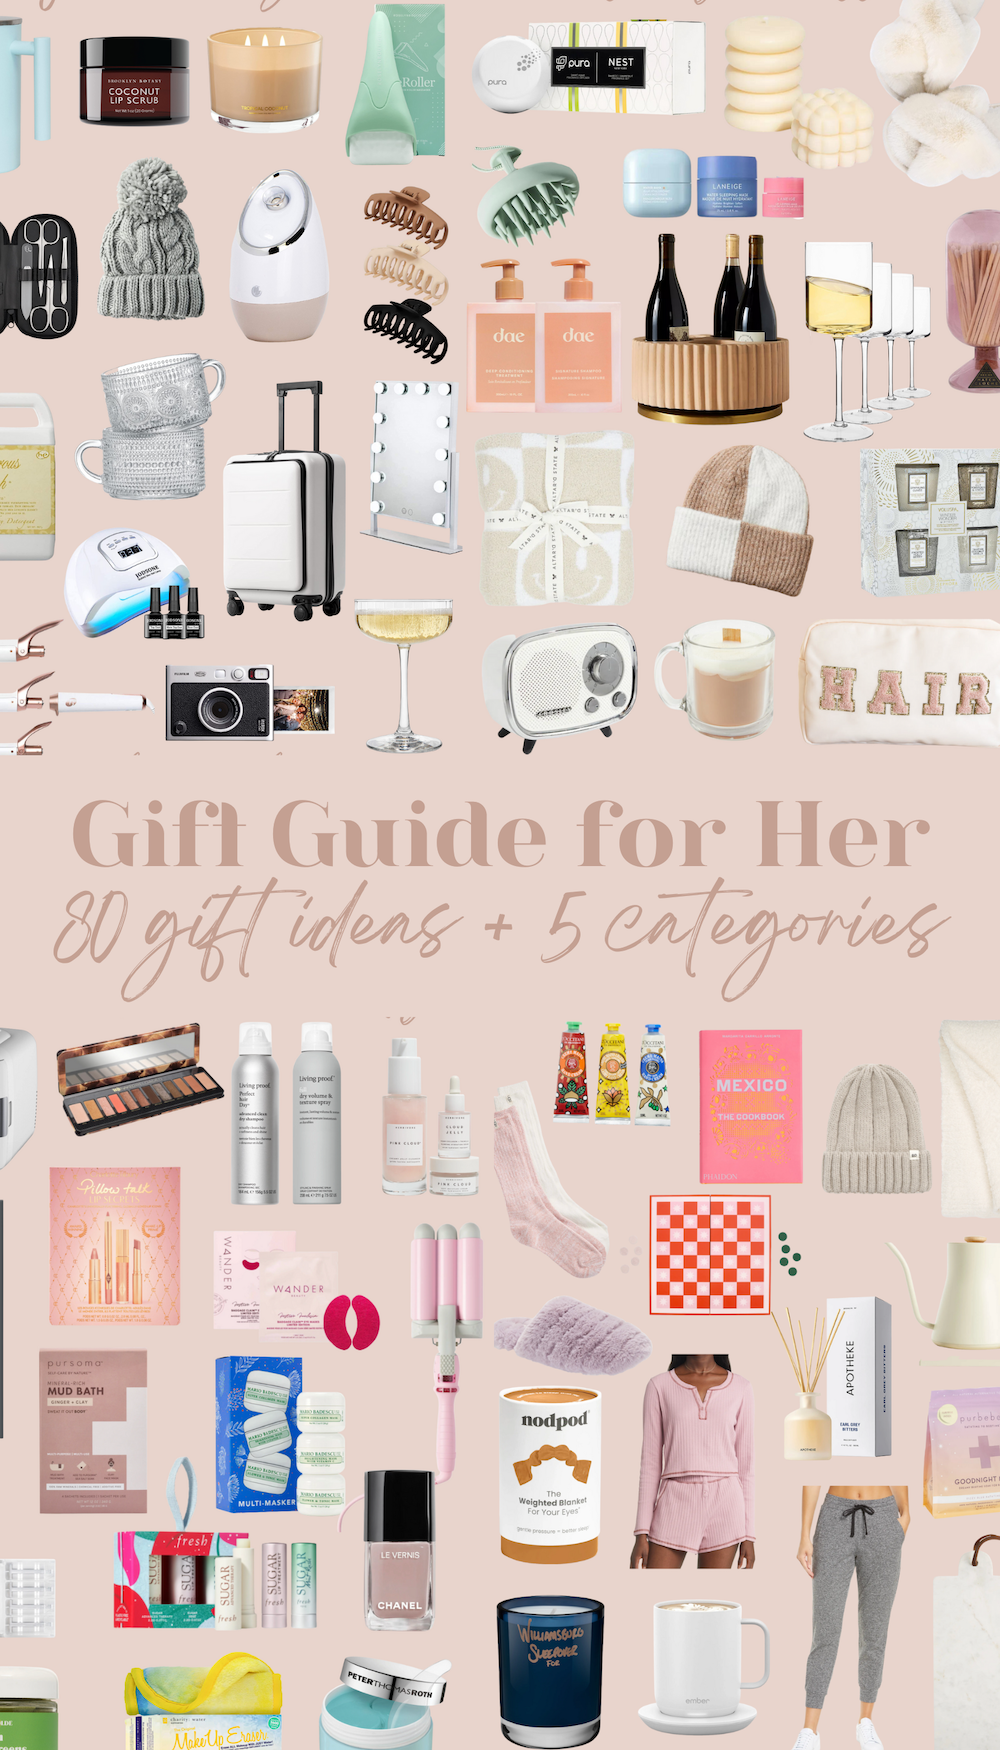 5 Affordable Holiday Gift Guides for Everyone